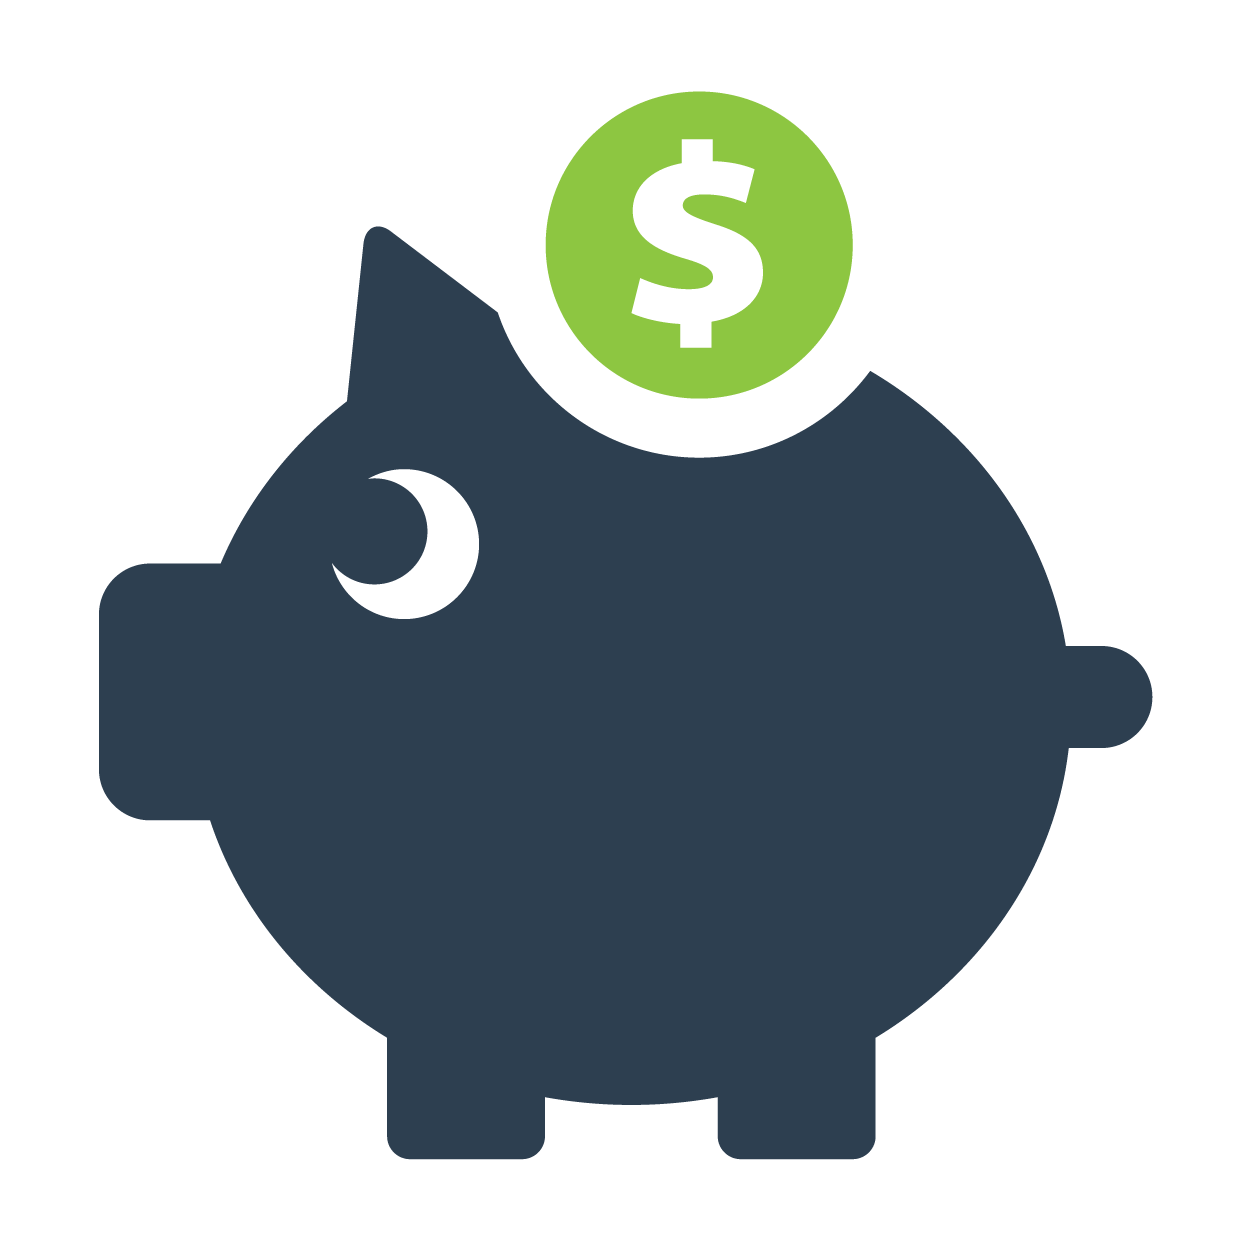 Icon of a green coin with white dollar sign going into a dark blue piggy bank